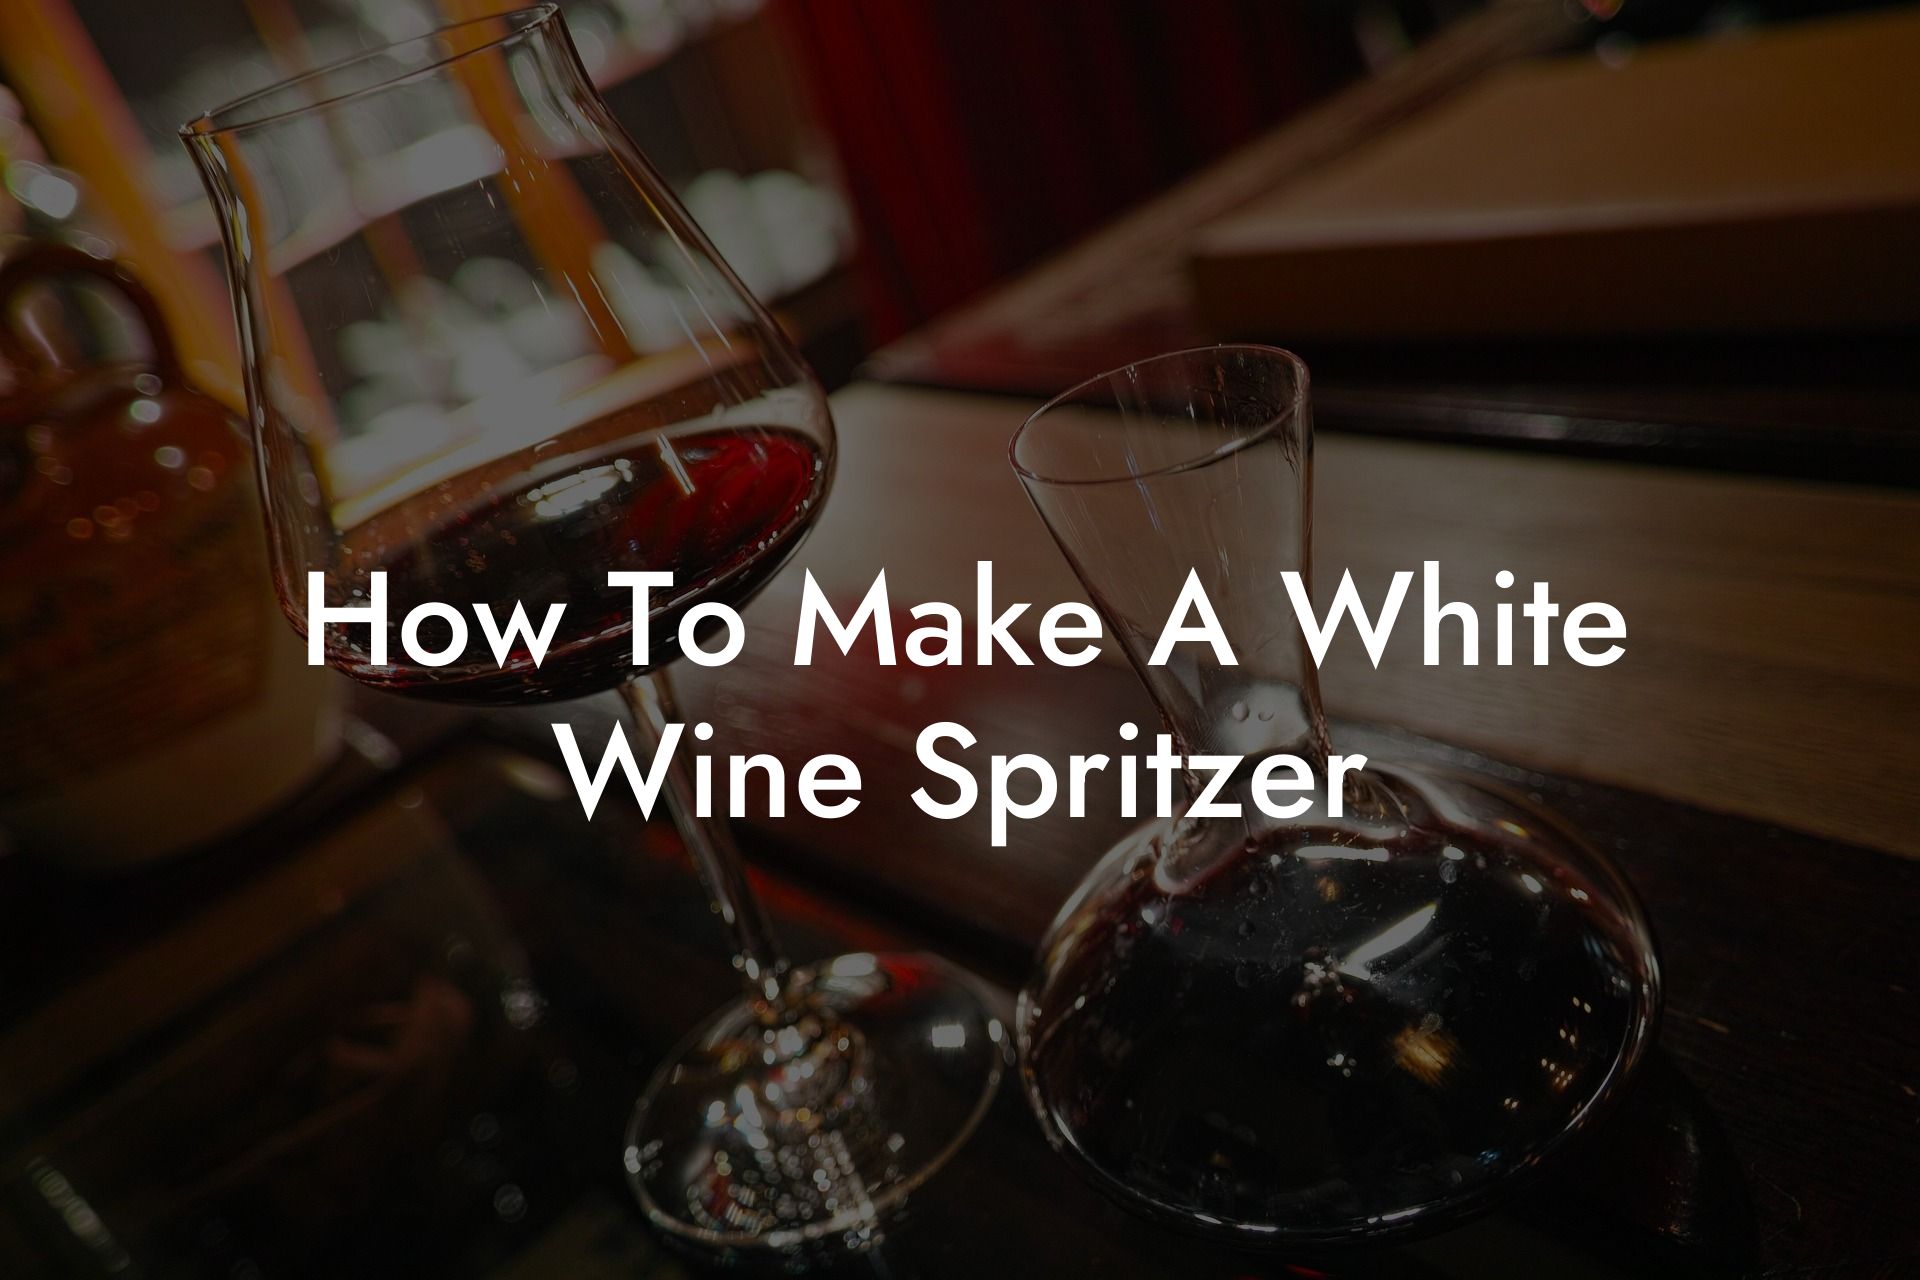 How To Make A White Wine Spritzer